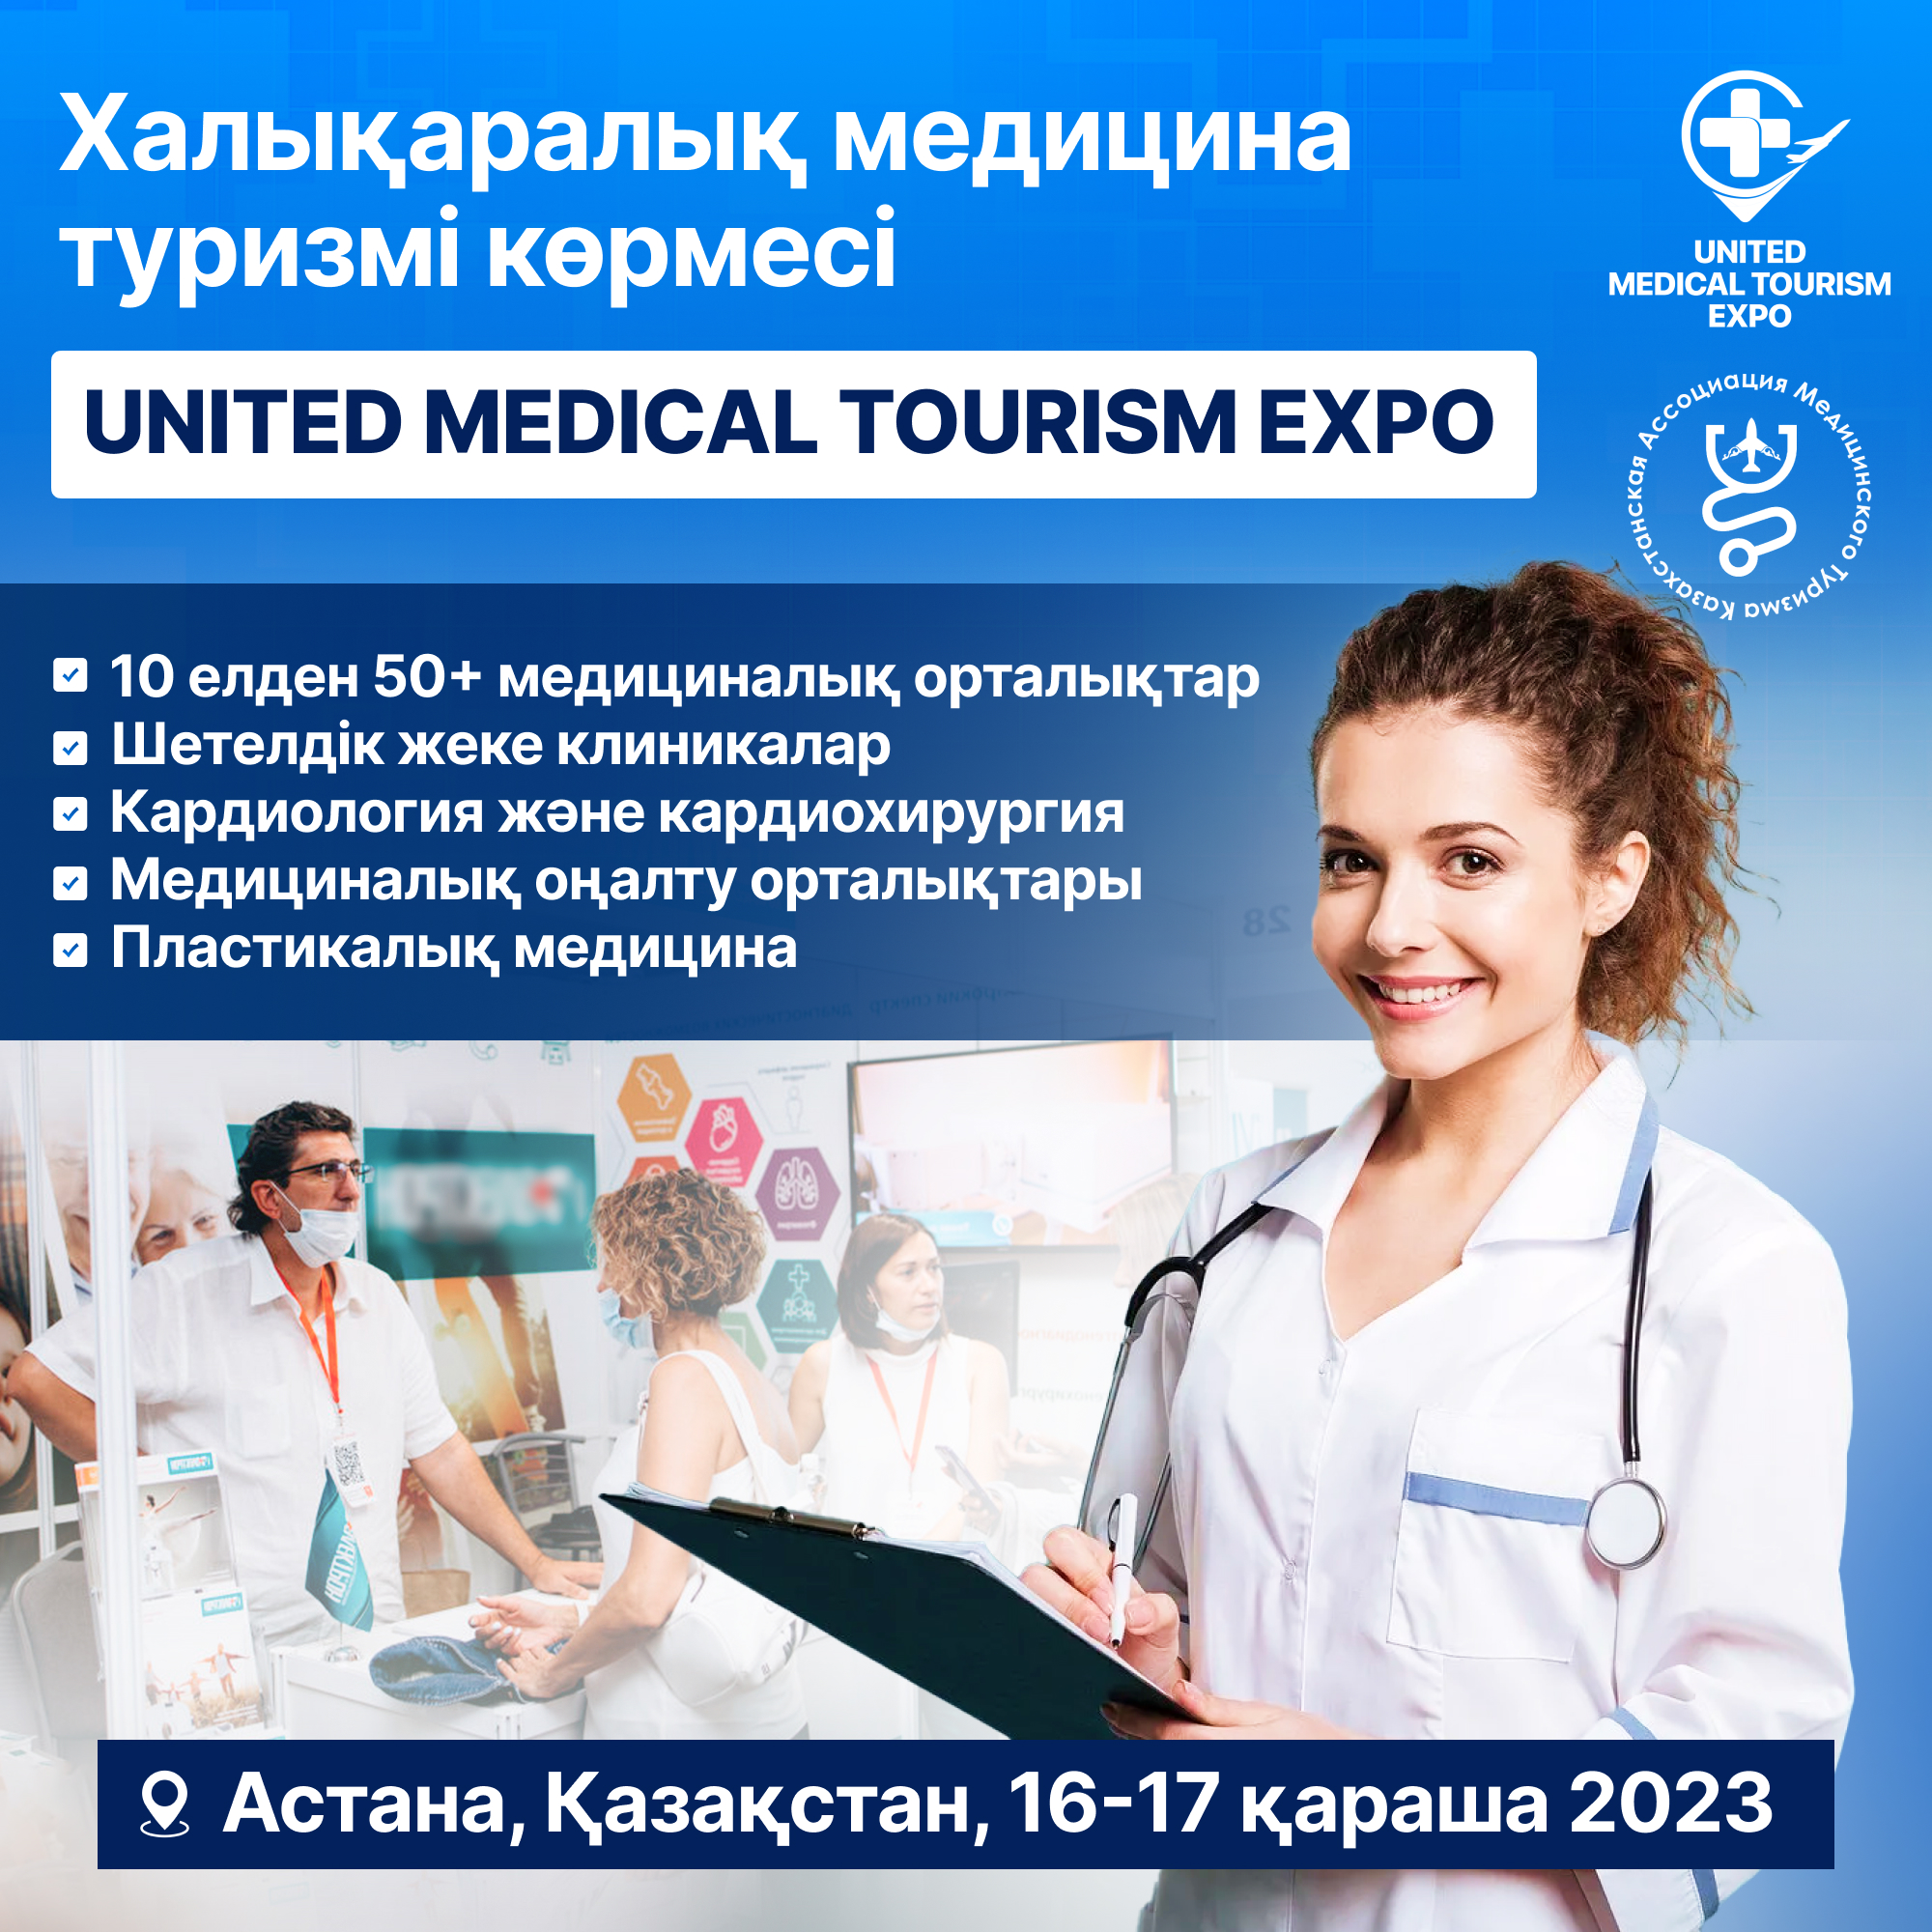 UNITED MEDICAL TOURISM EXPO 2023 medical tourism exhibition to be held at the IEC EXPO